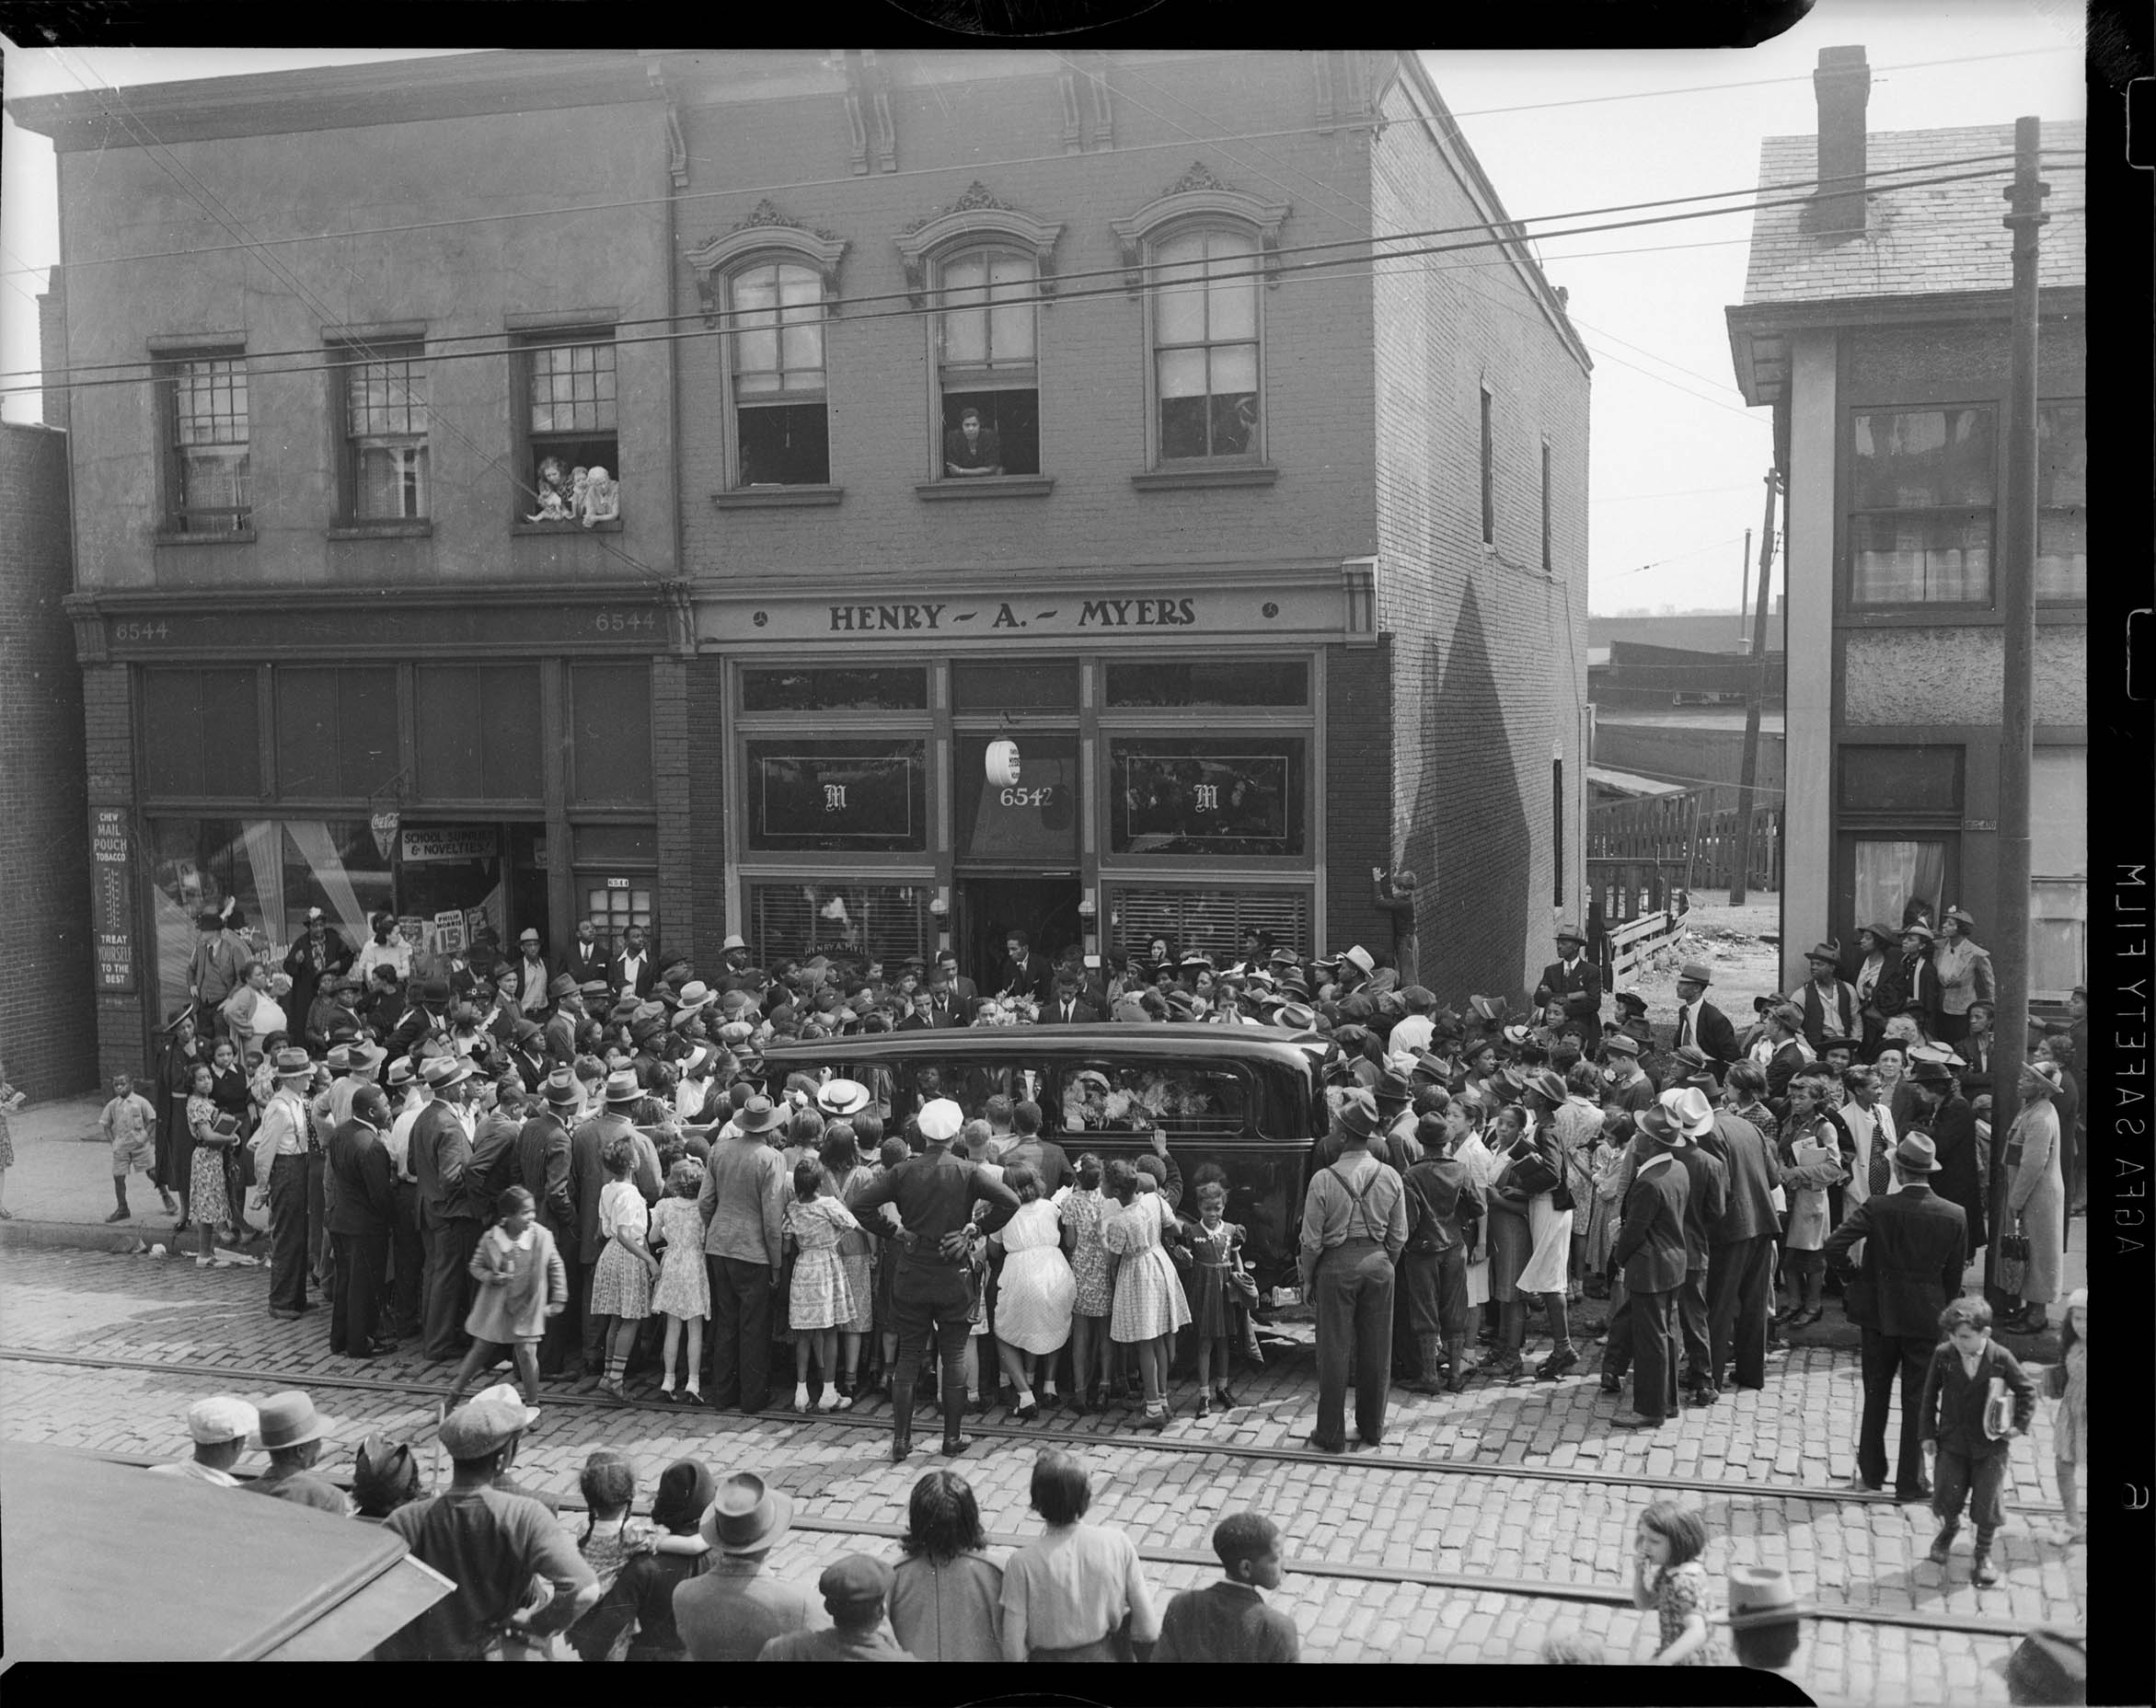 Busy city street, with large crowd gathered around a hearse